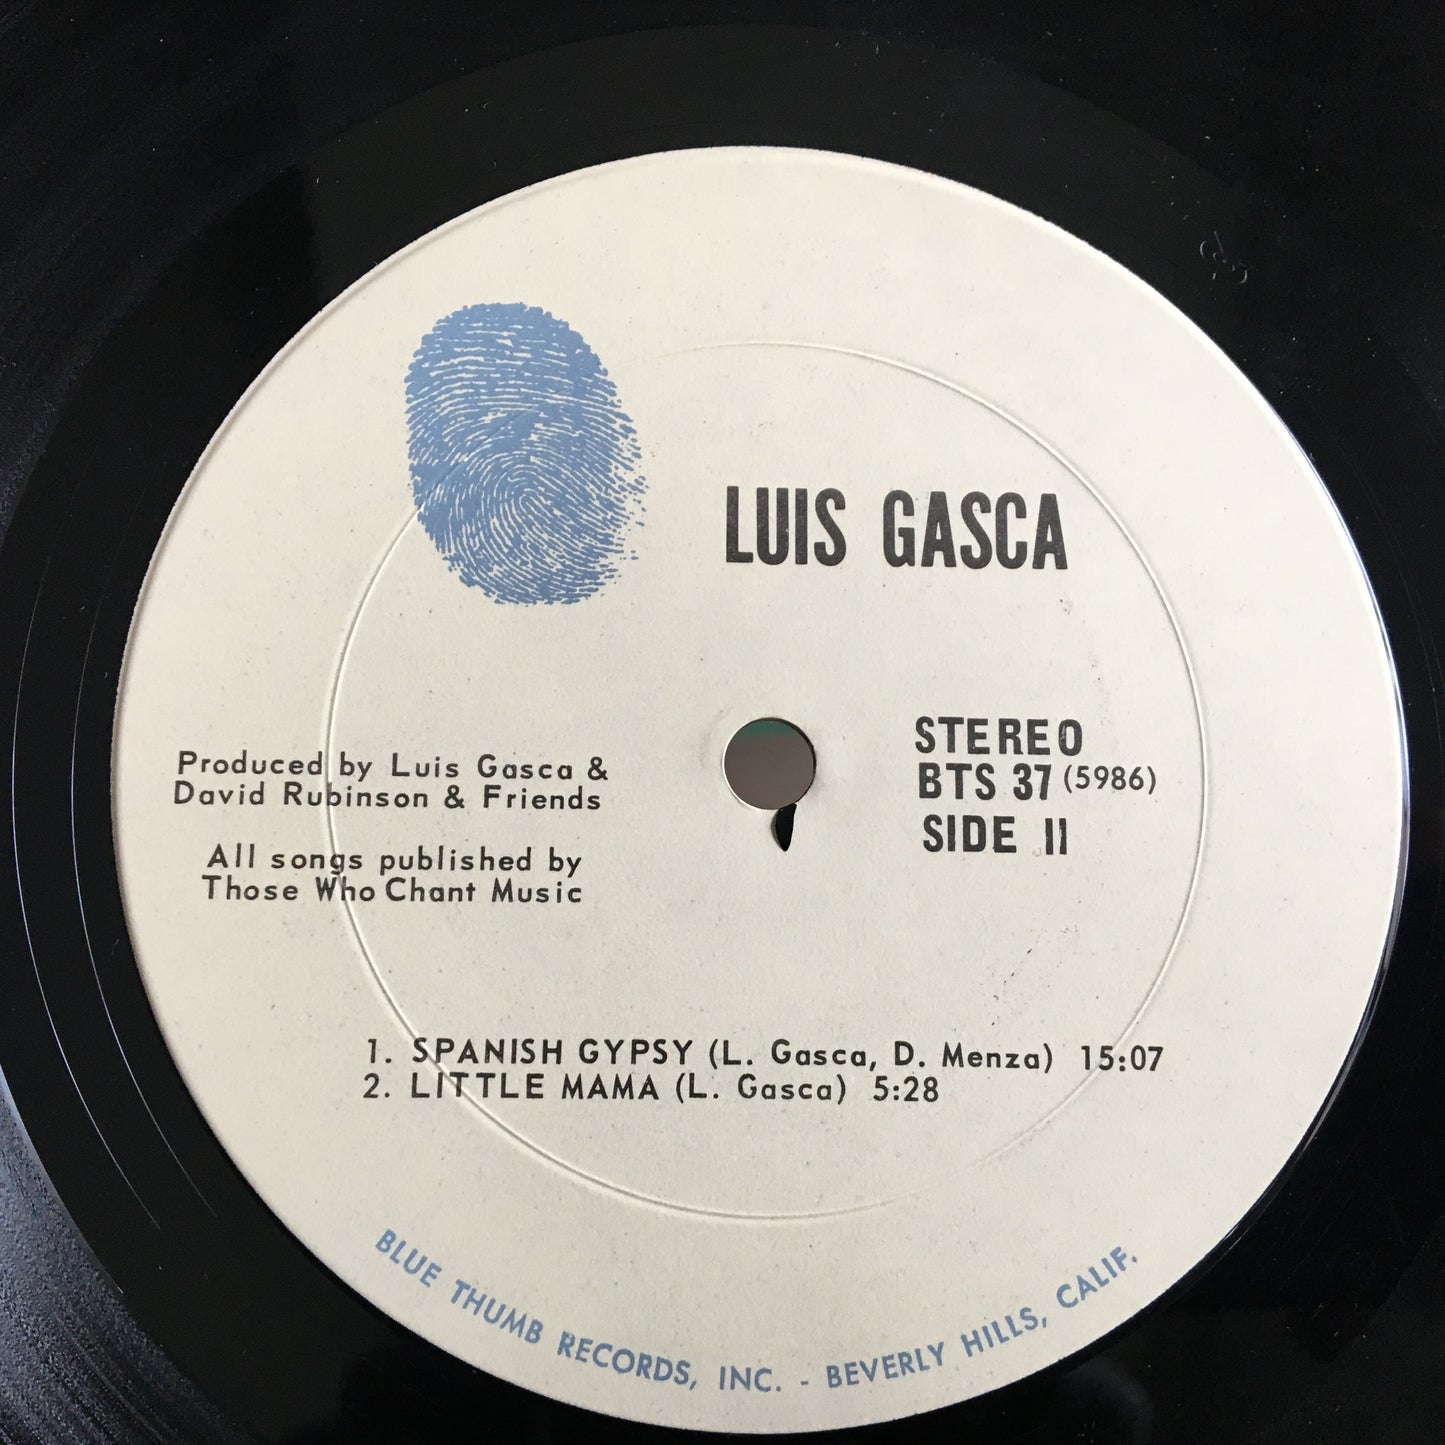 Luis Gasca – For Those Who Chant